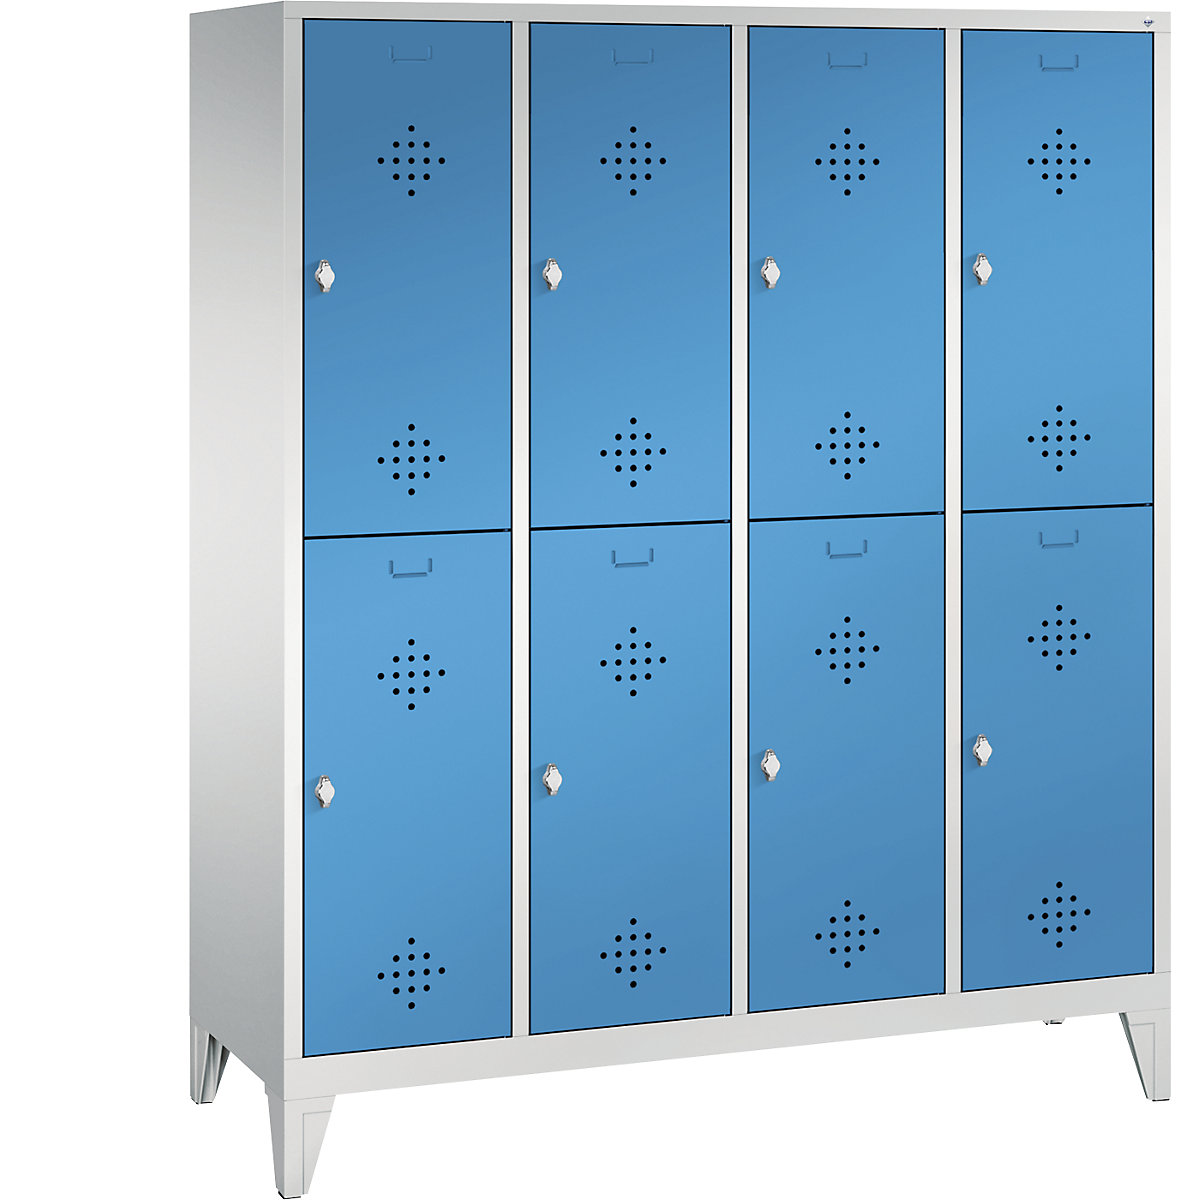 CLASSIC cloakroom locker with feet, double tier – C+P